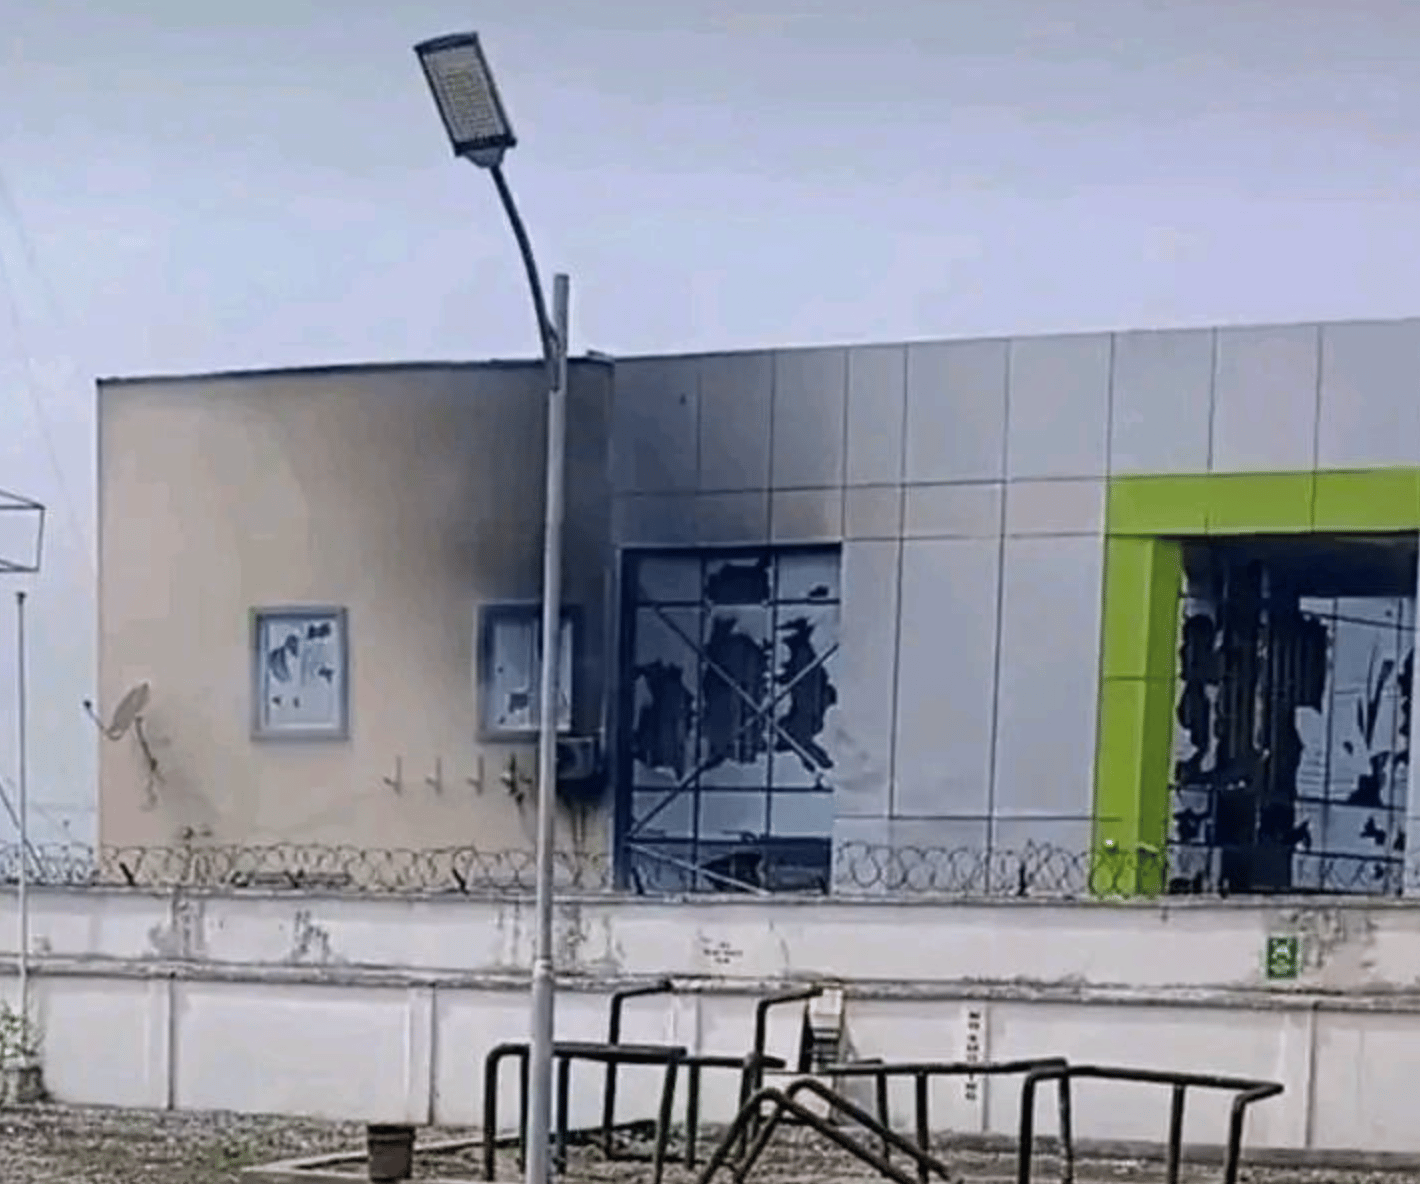 Protesters Raze Access Bank & Loot Union Bank Over No New Naira Notes in Udu Suburb of Warri, Niger Delta, Nigeria - 15 February 2023